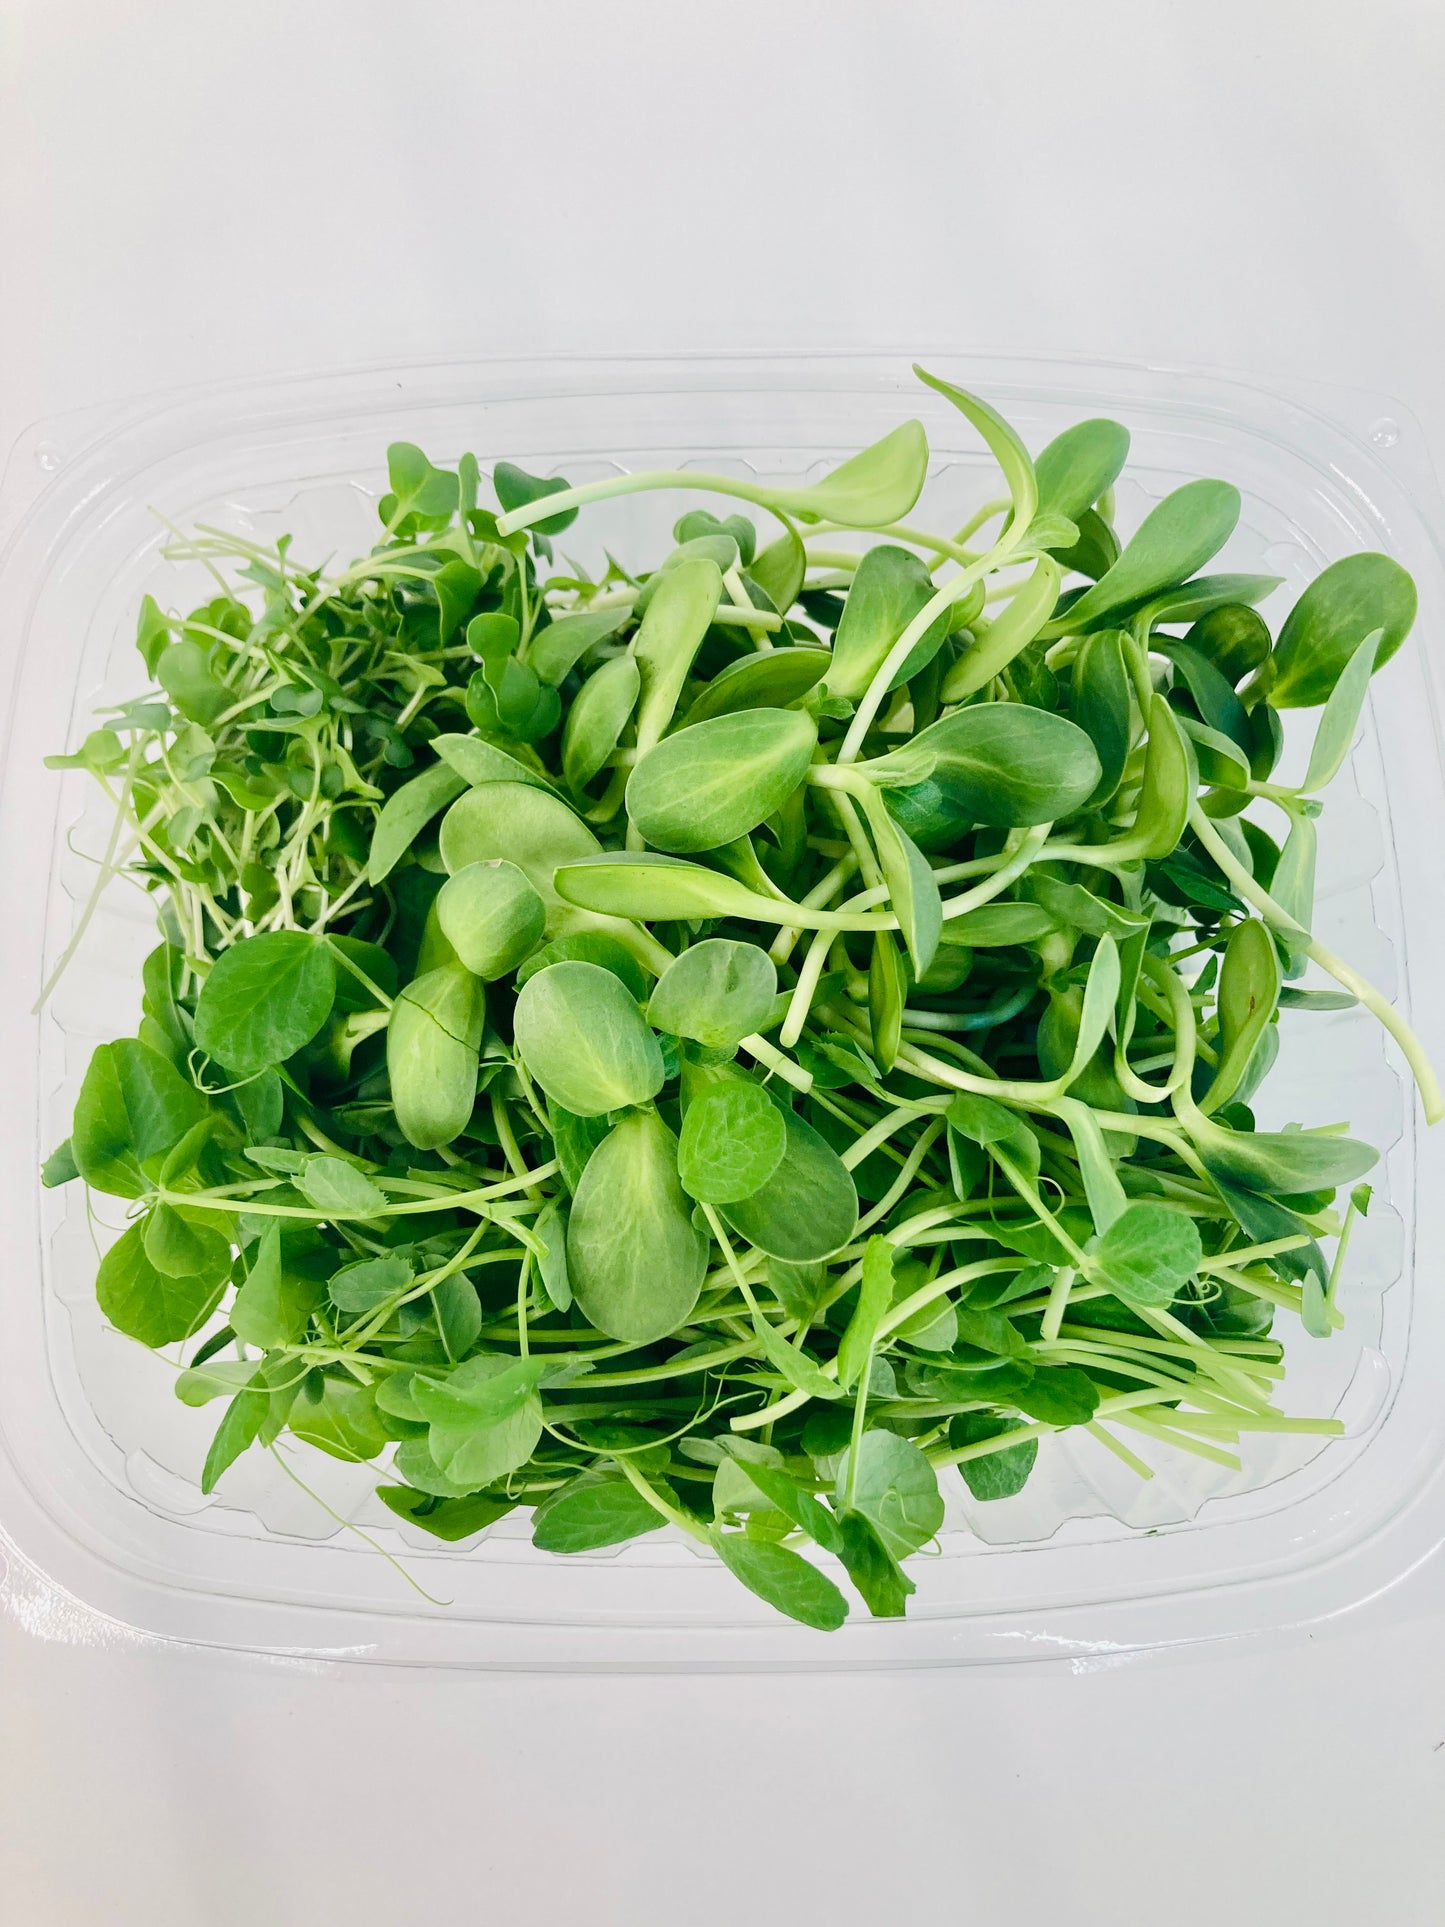 The Microgreens First Timer